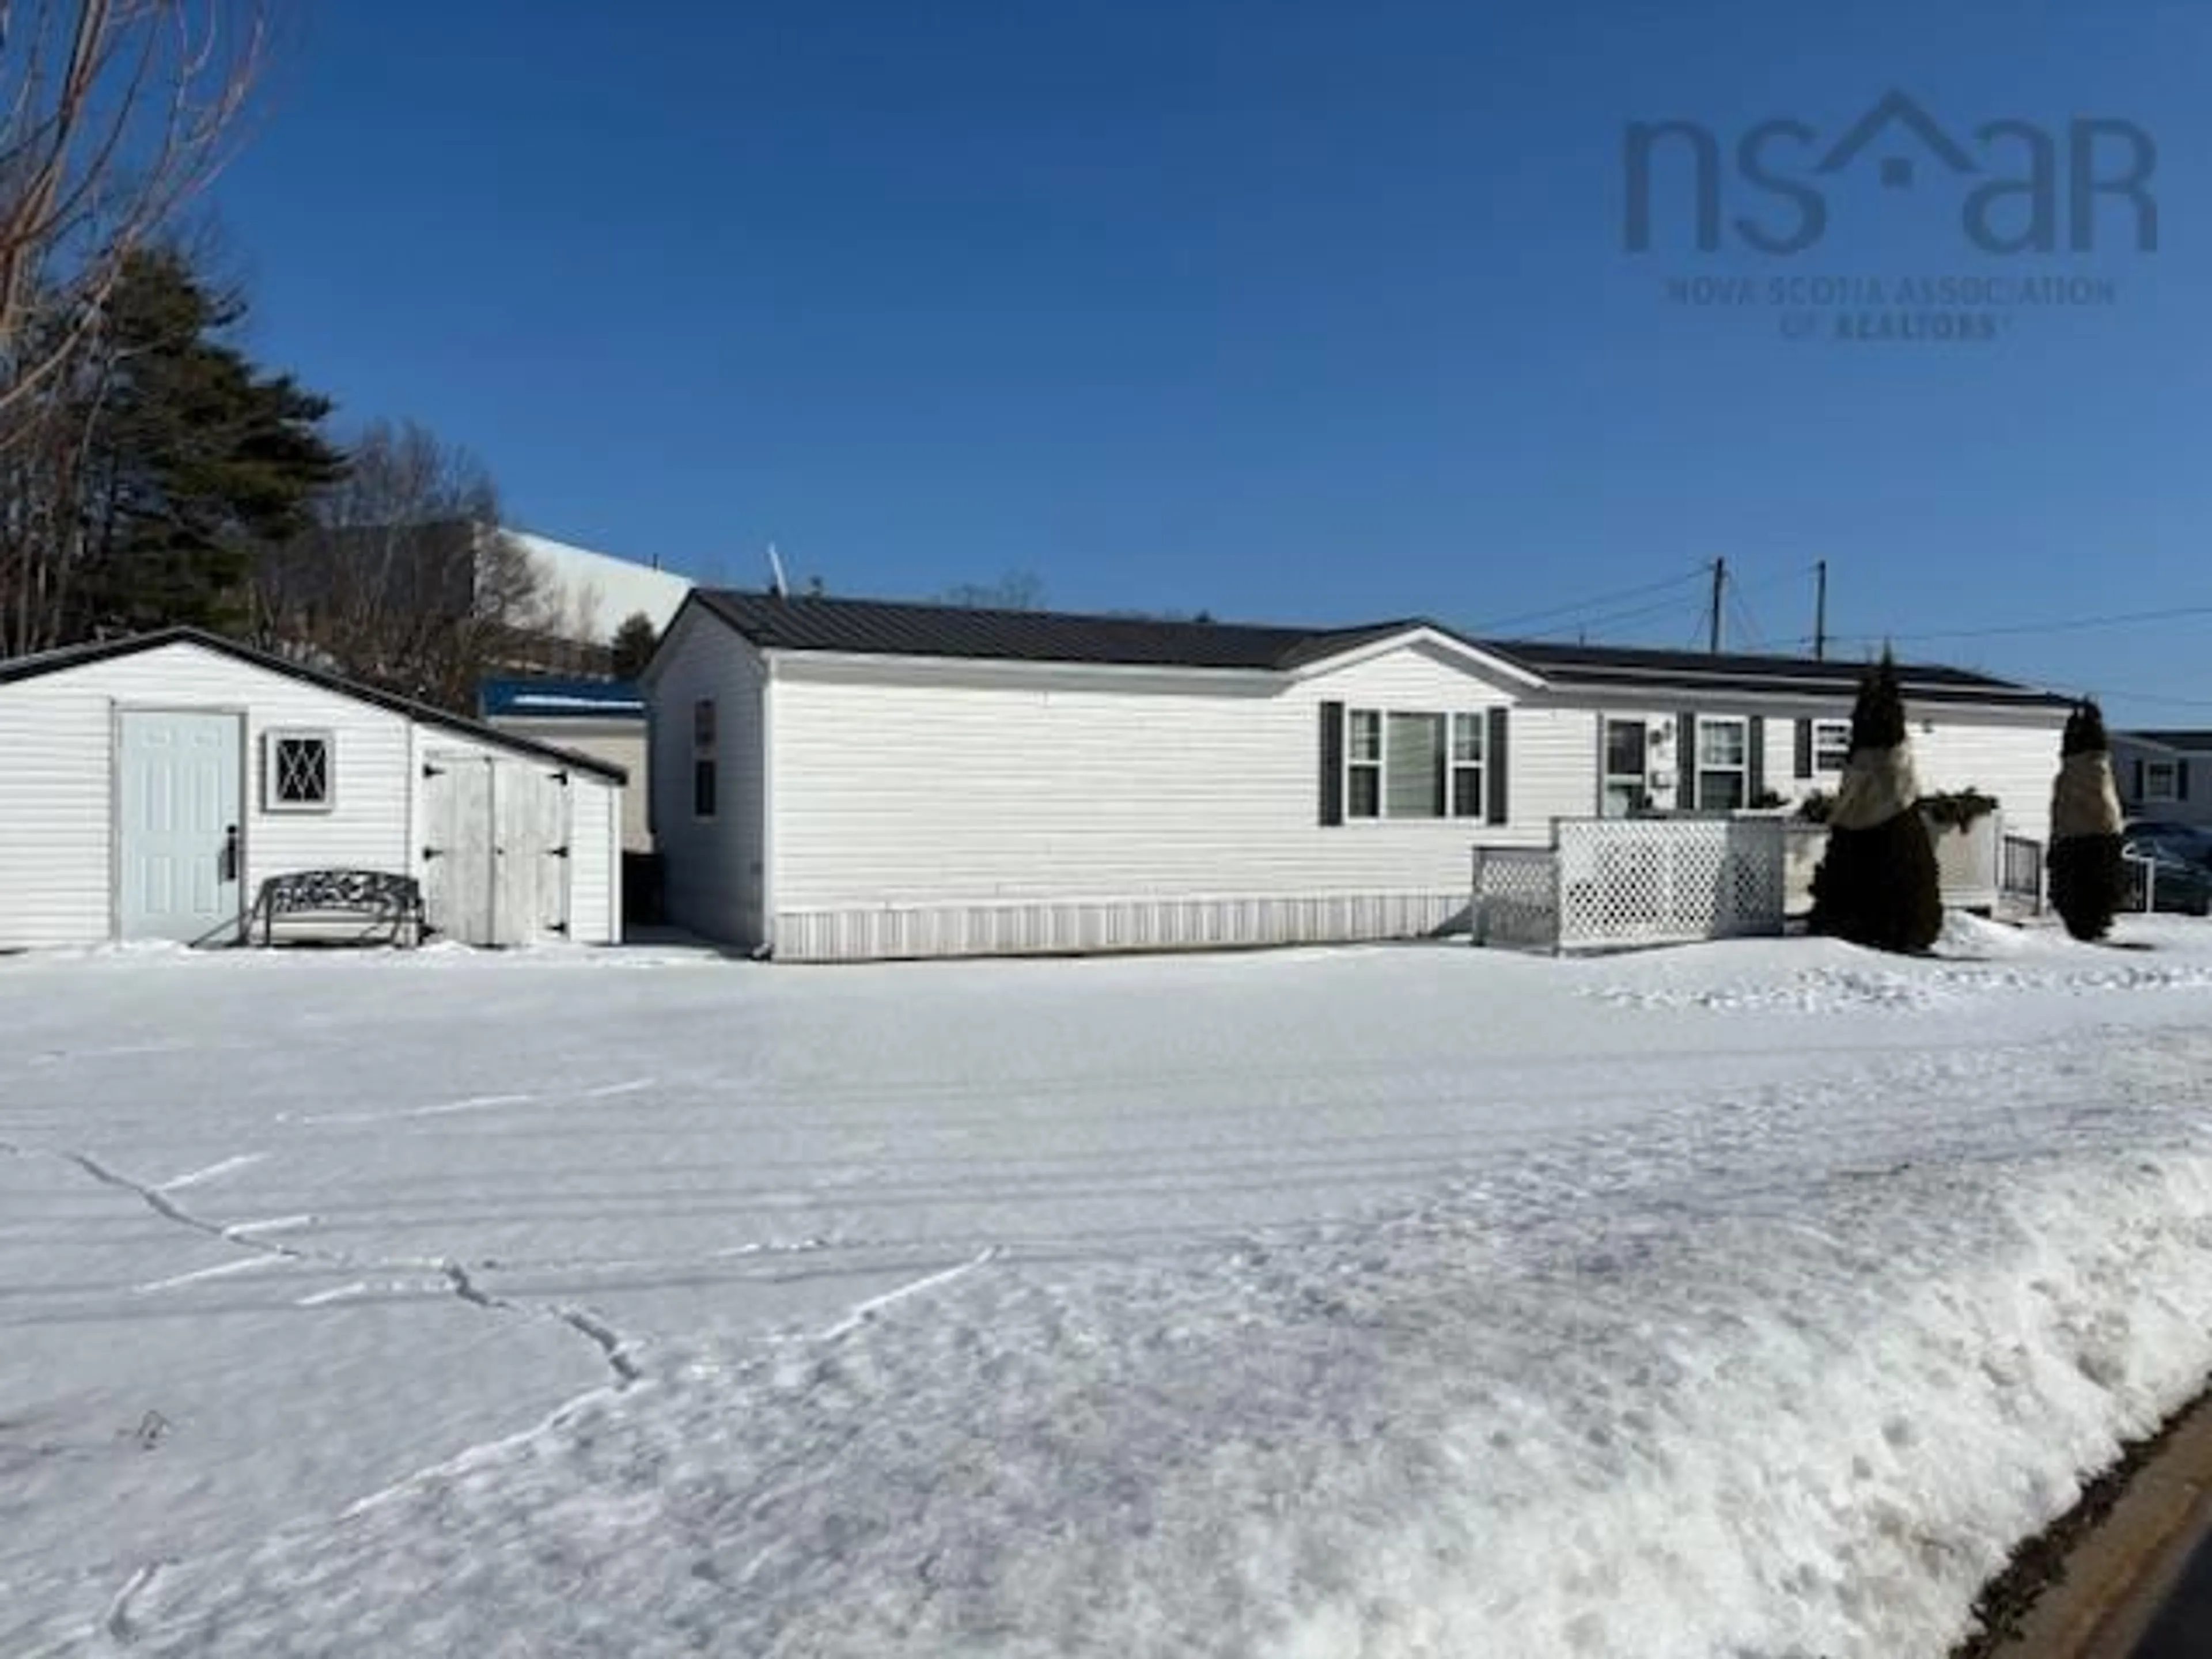 Home with unknown exterior material for 178 Sherbrooke Ave, Bridgewater Nova Scotia B4V 4H4